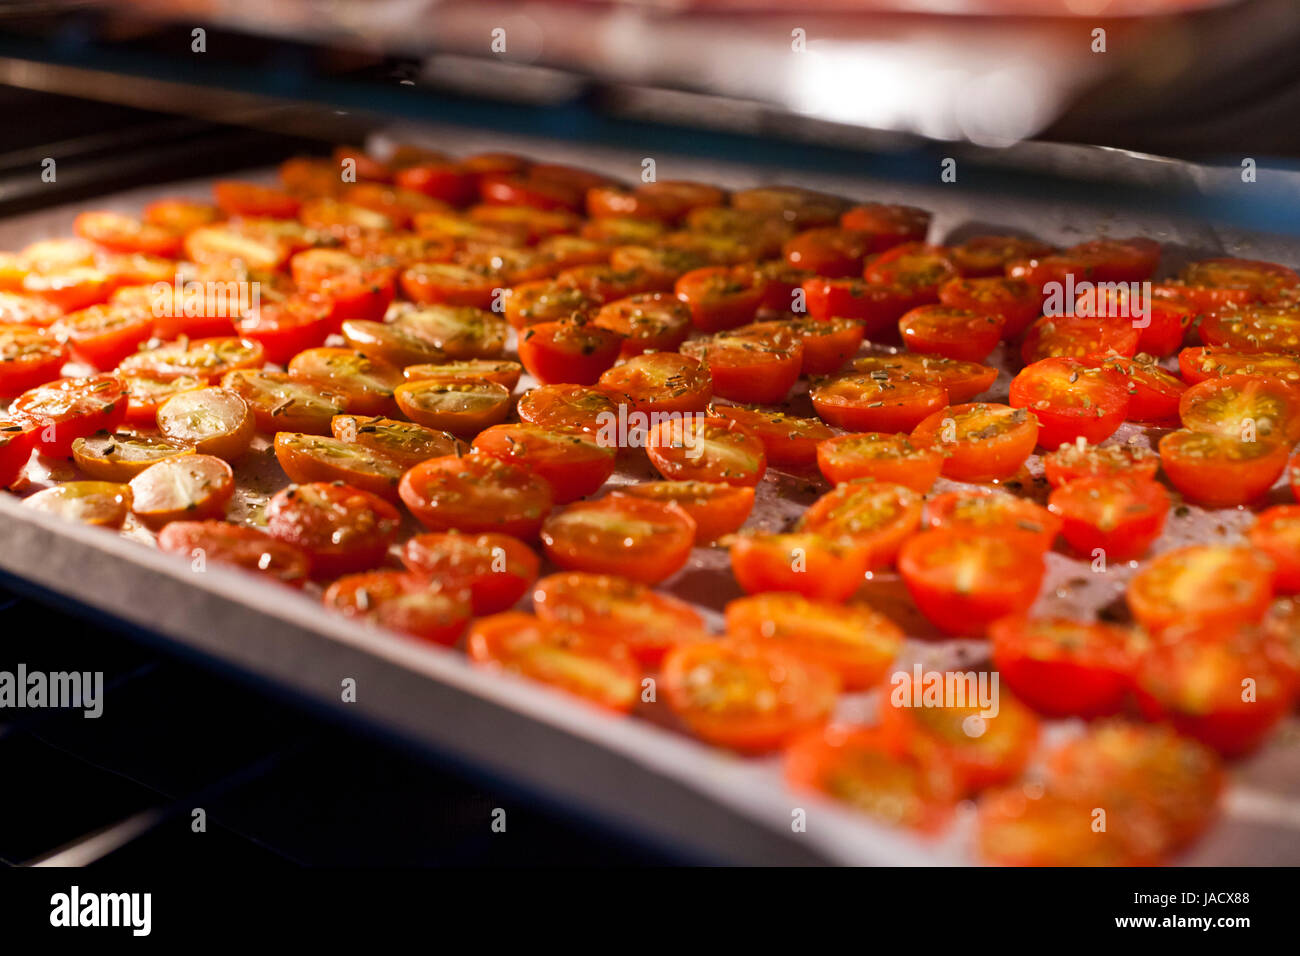 Trays of fresh cherry tomatoes on racks drying in the oven Stock Photo